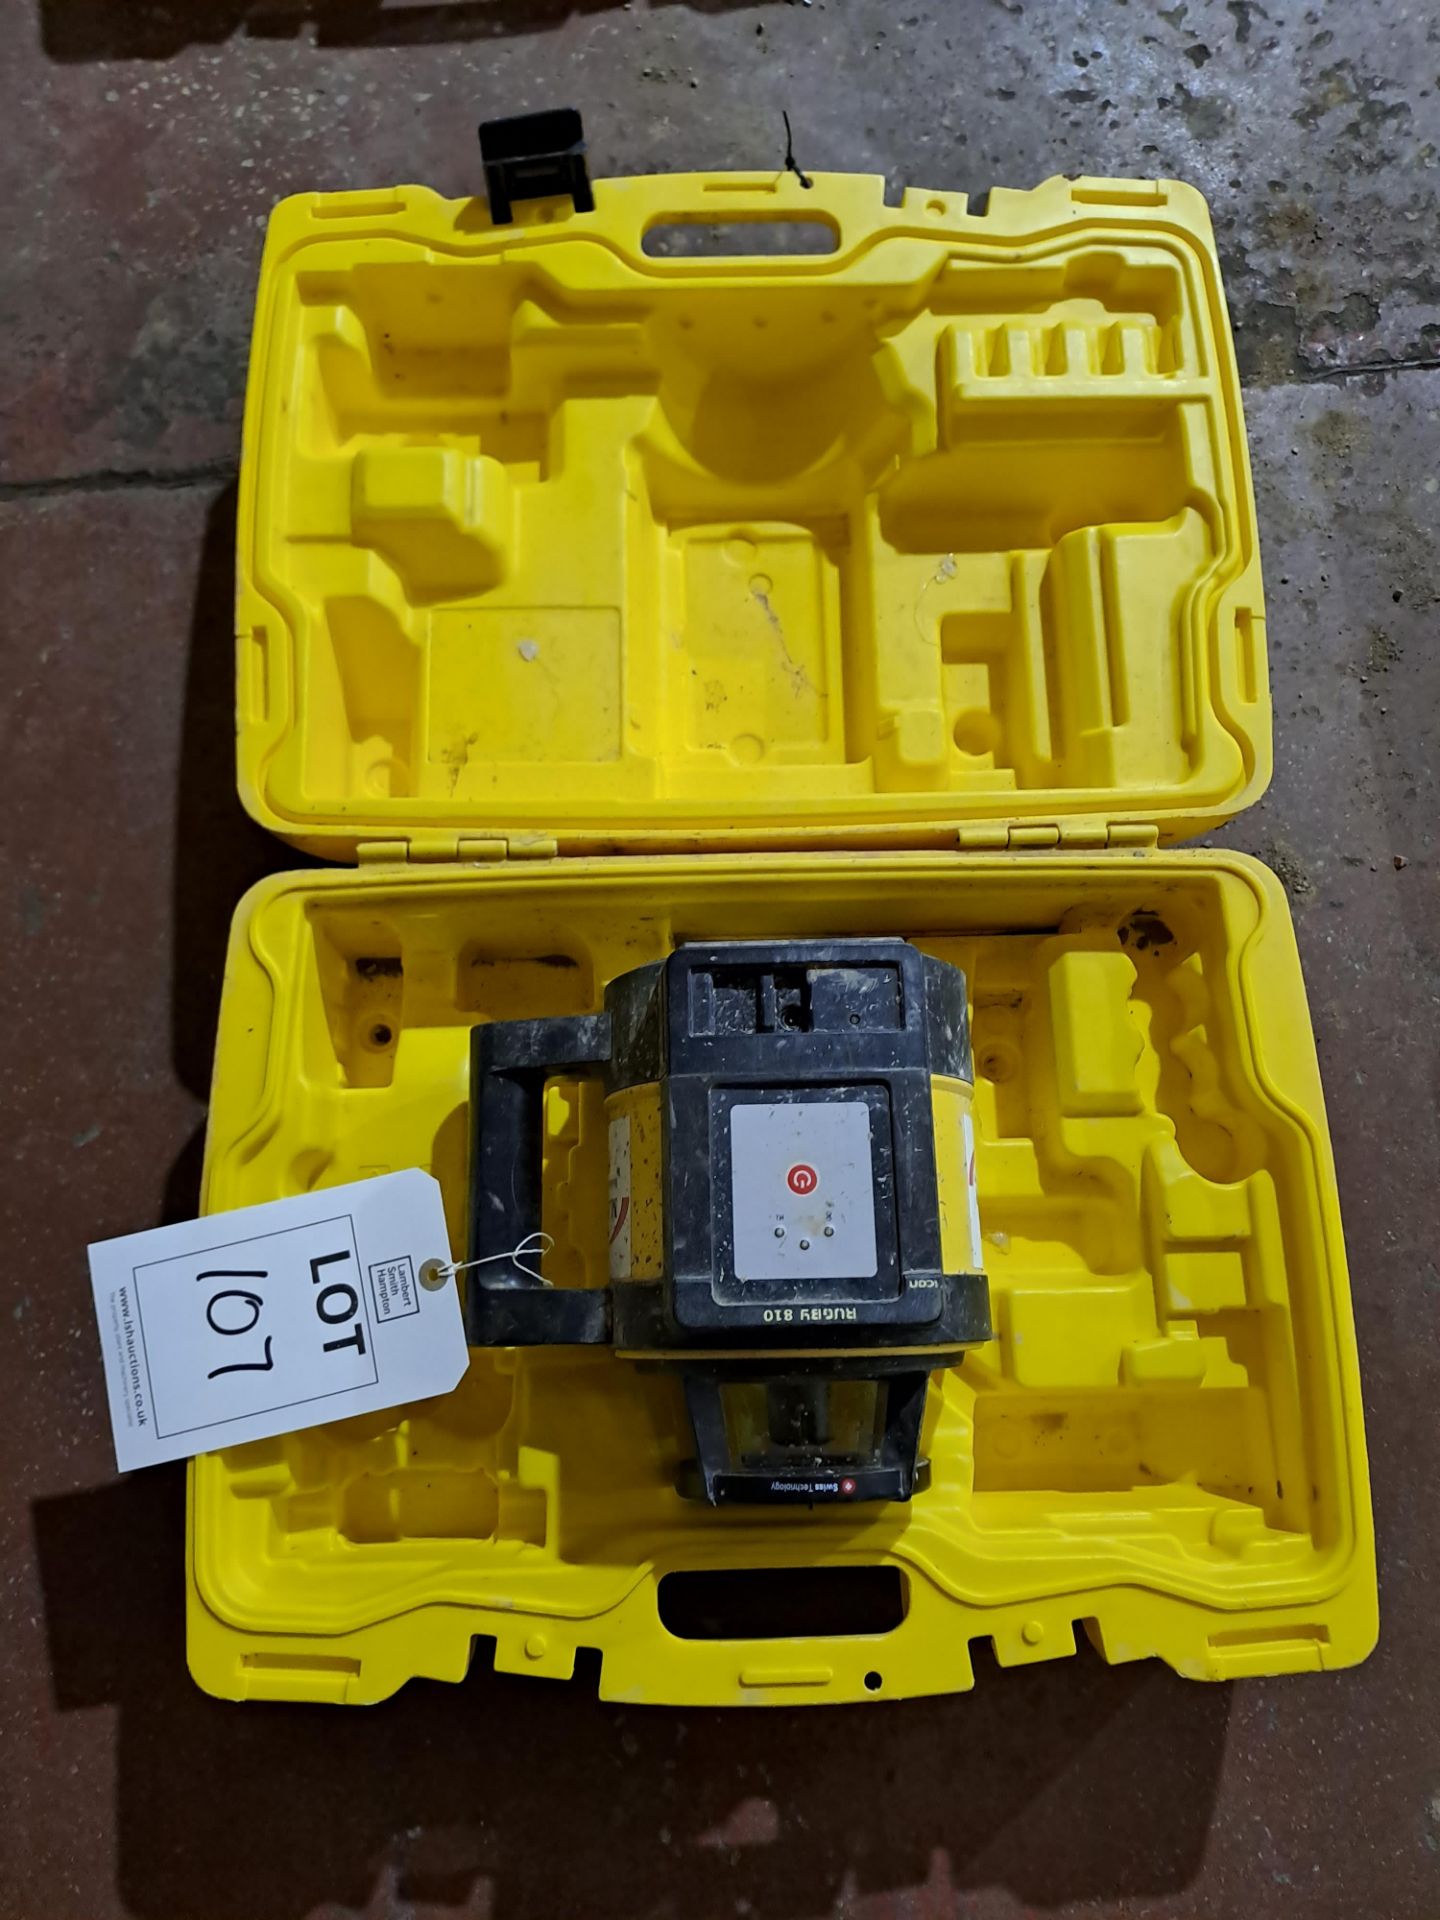 Leica Rugby 810 laser level, serial no. 12638105124, with carry case